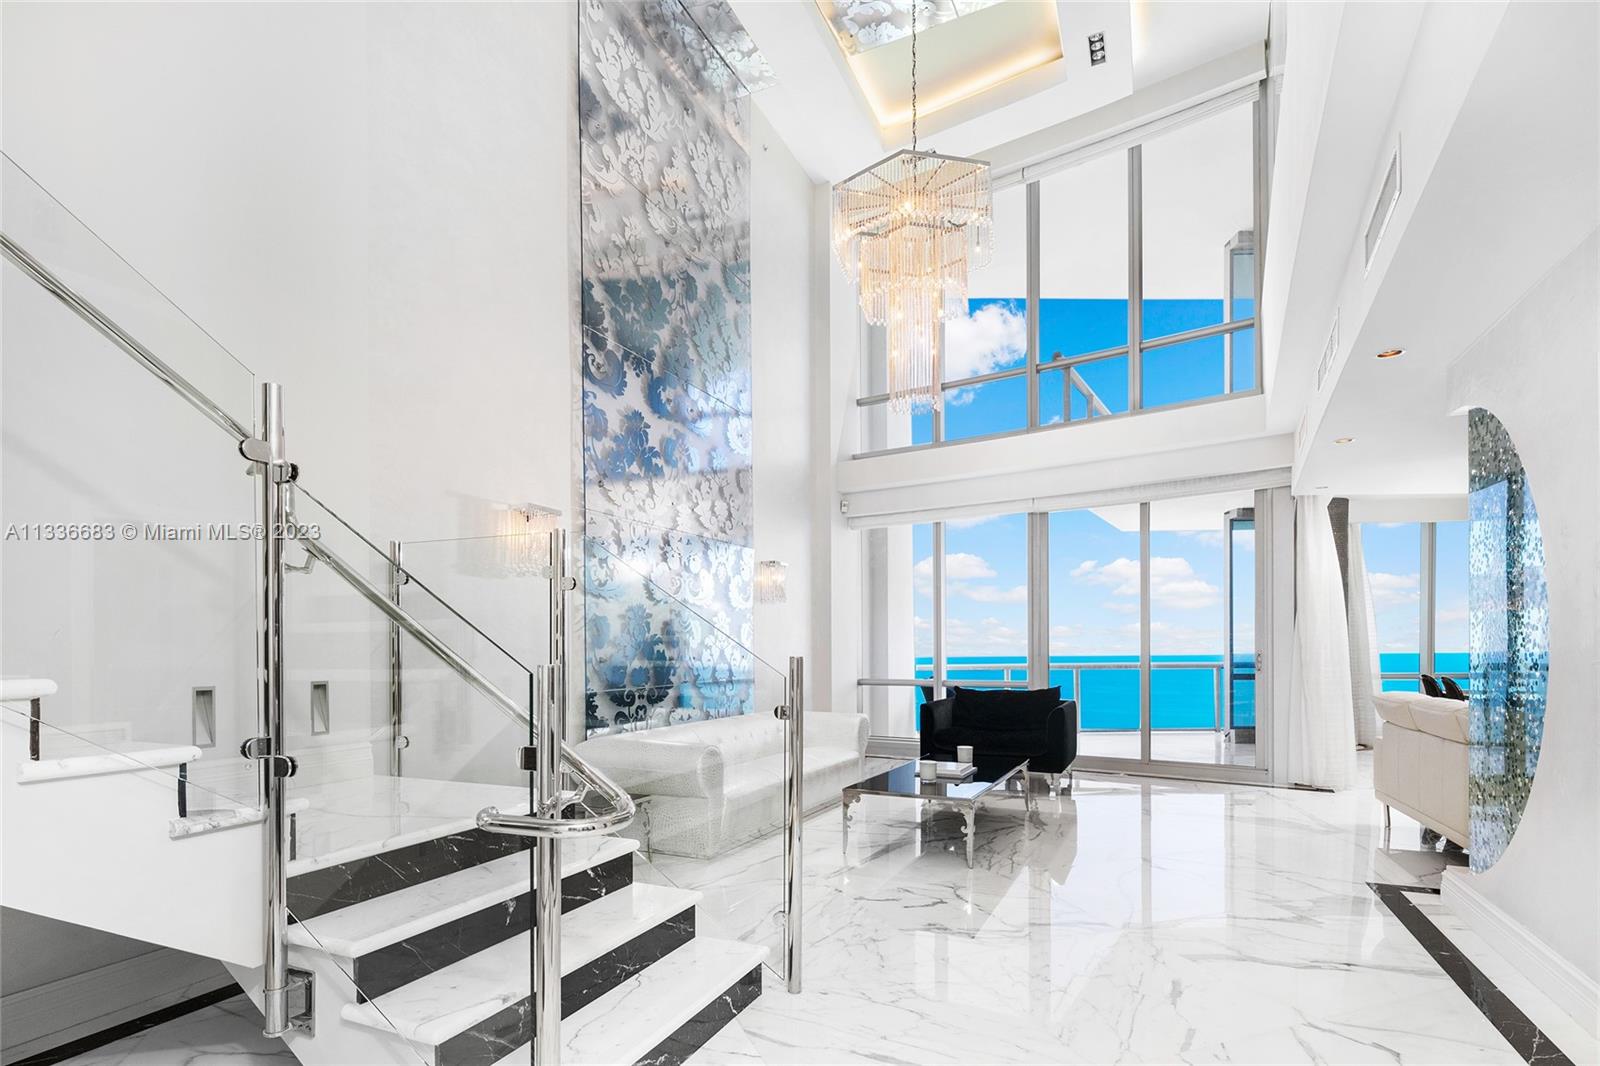 This fabulous 2-story Lower PH in Sunny Isles at the Jade Ocean was designed by World renowned architect Carlos Ott. Private foyer off elevator with double entrance doors, this 4BR/4+1BA unit boasts soaring 20FT plus ceilings & spans over 4,303 SF of interior spaces & numerous terraces that overlook the ocean with magnificent sunrises and breathtaking sunsets. Exquisite 36”x36” Calcutta Gold select marble floors throughout w/Black Marquina marble borders & accents. Sleek chef’s kitchen sports top-of-the-line Subzero & Miele appliances, center island. Beautiful oceanside principal suite & bath. Creston system, electric blinds/blackouts, hurricane impact doors/windows & separate laundry room. Jade Ocean is a full-service building, including concierge, valet parking & more.